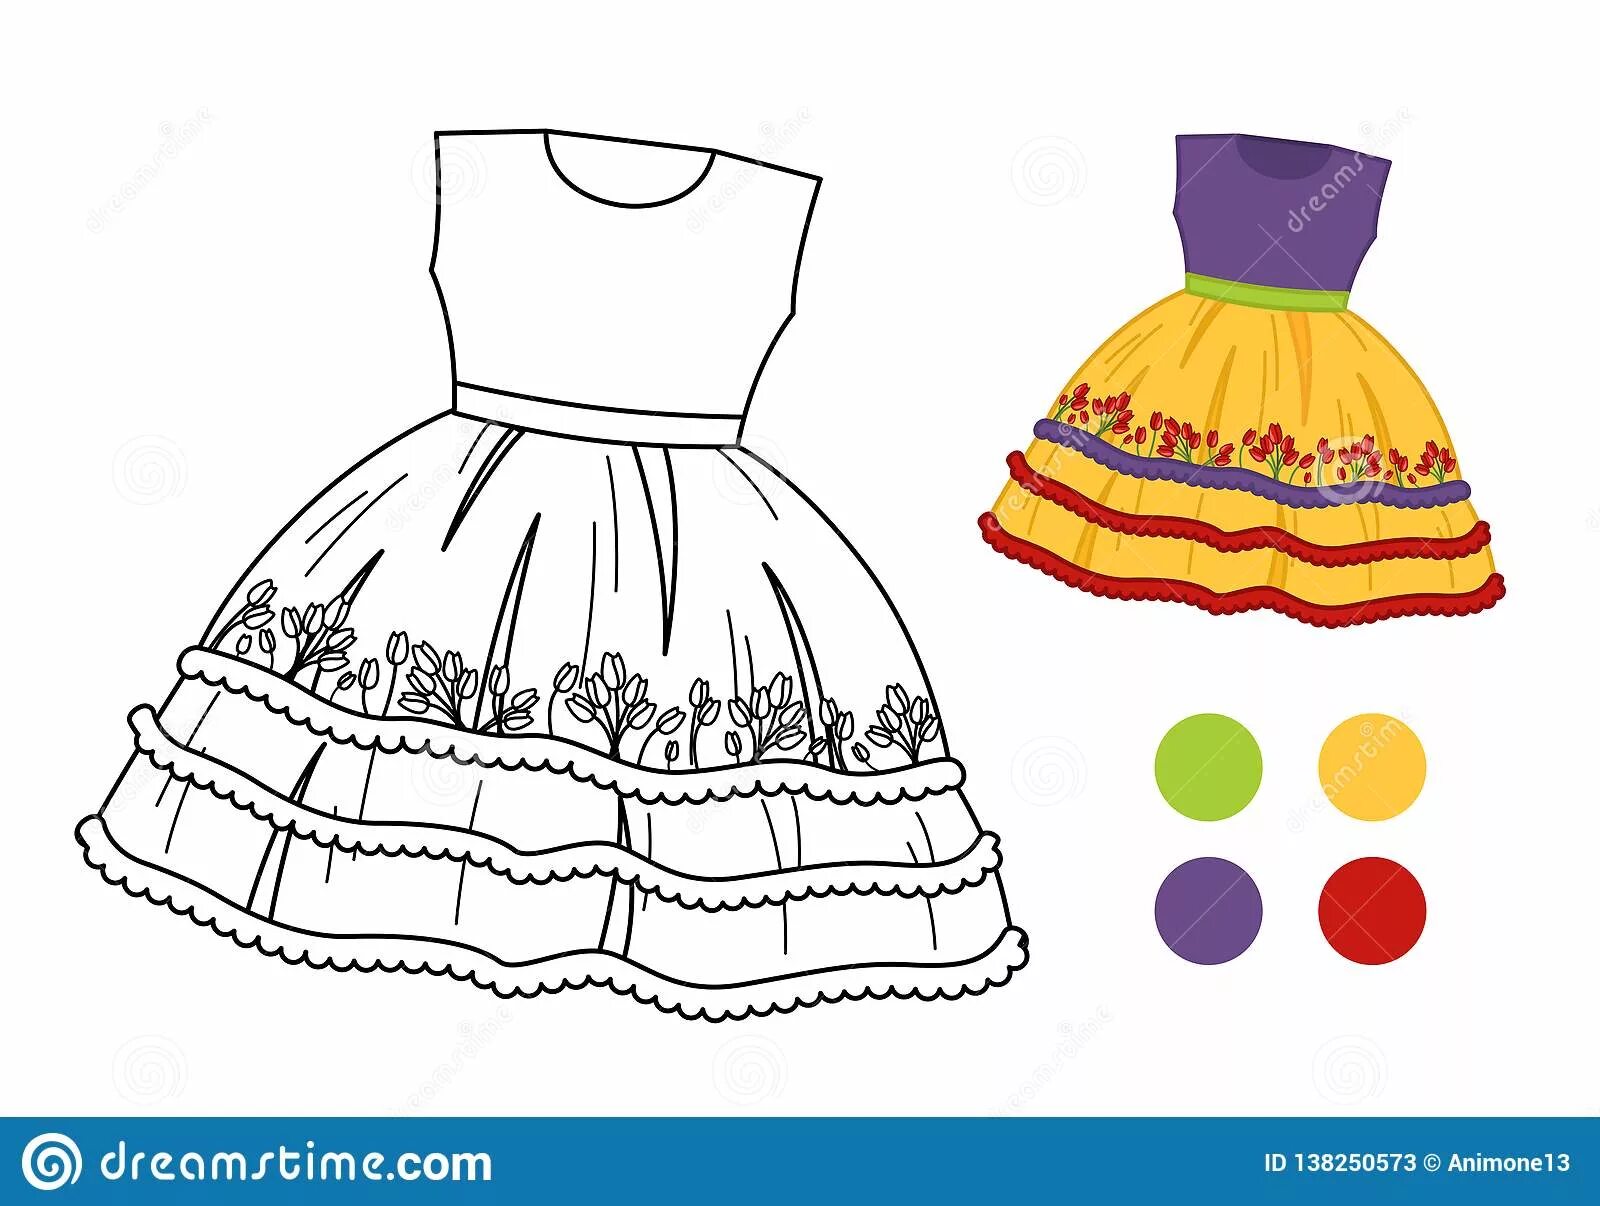 Outstanding doll dress coloring book for 4-5 year olds